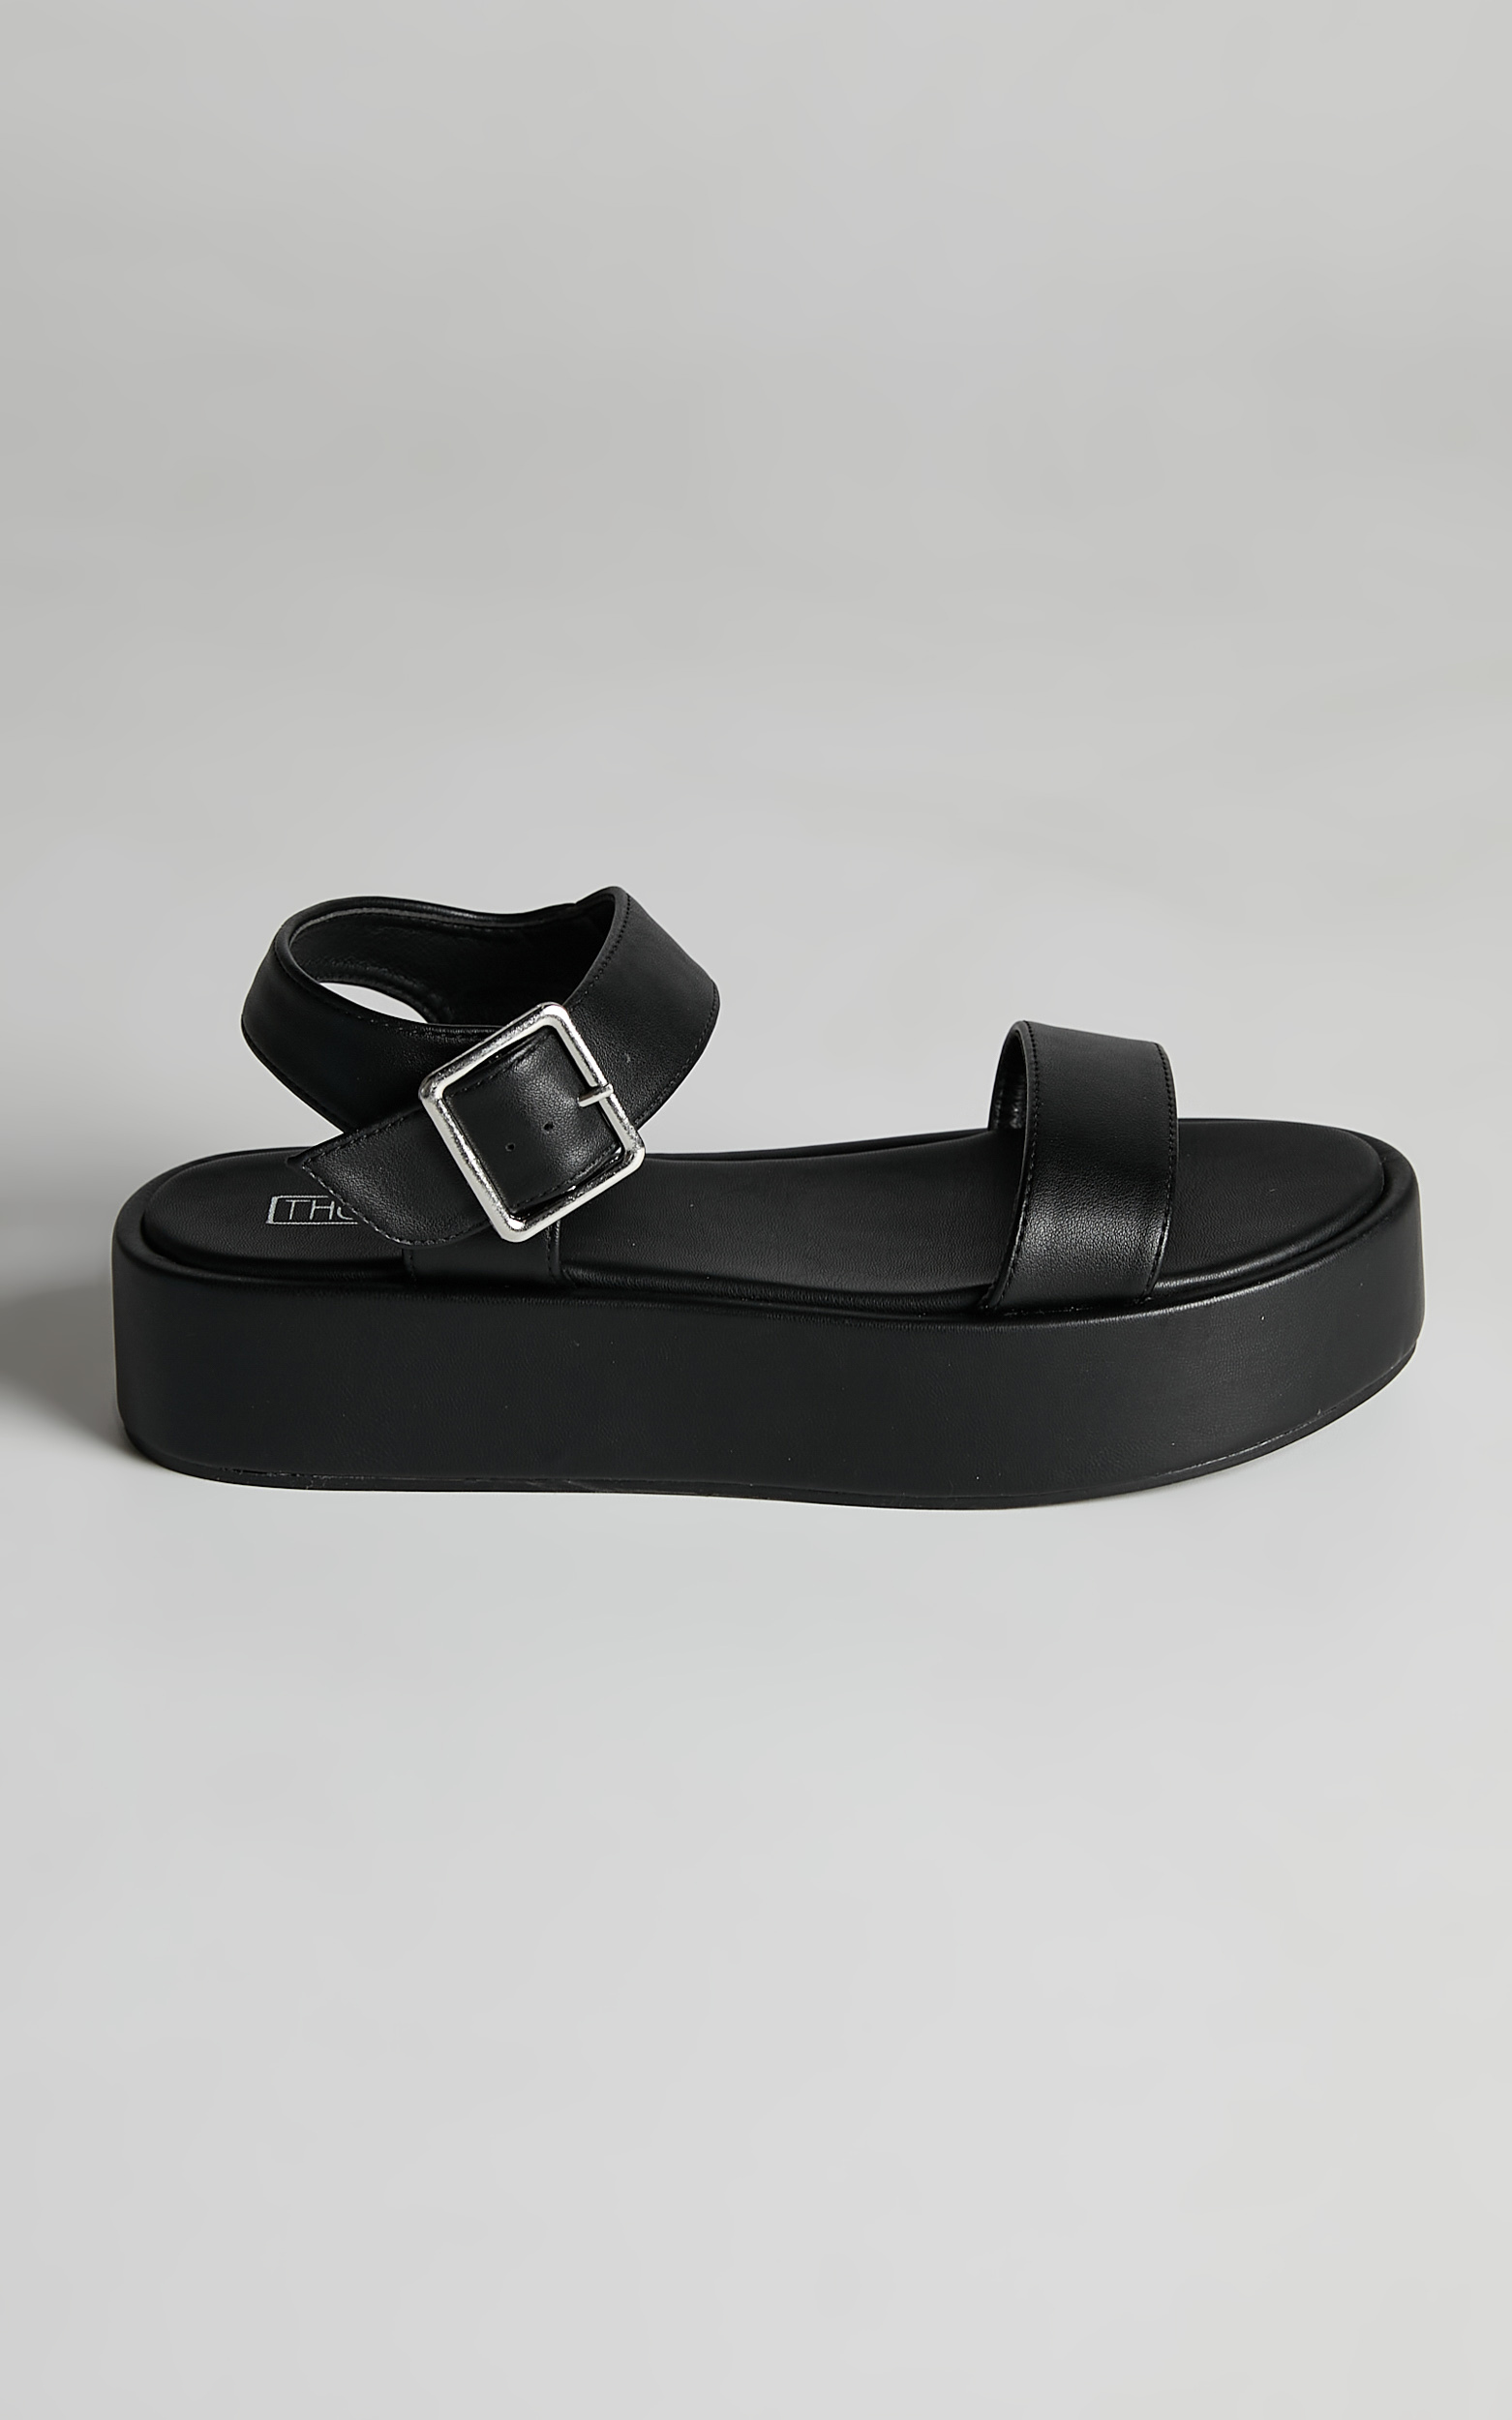 Therapy - Annabella Sandals in Black - 05, BLK1, hi-res image number null